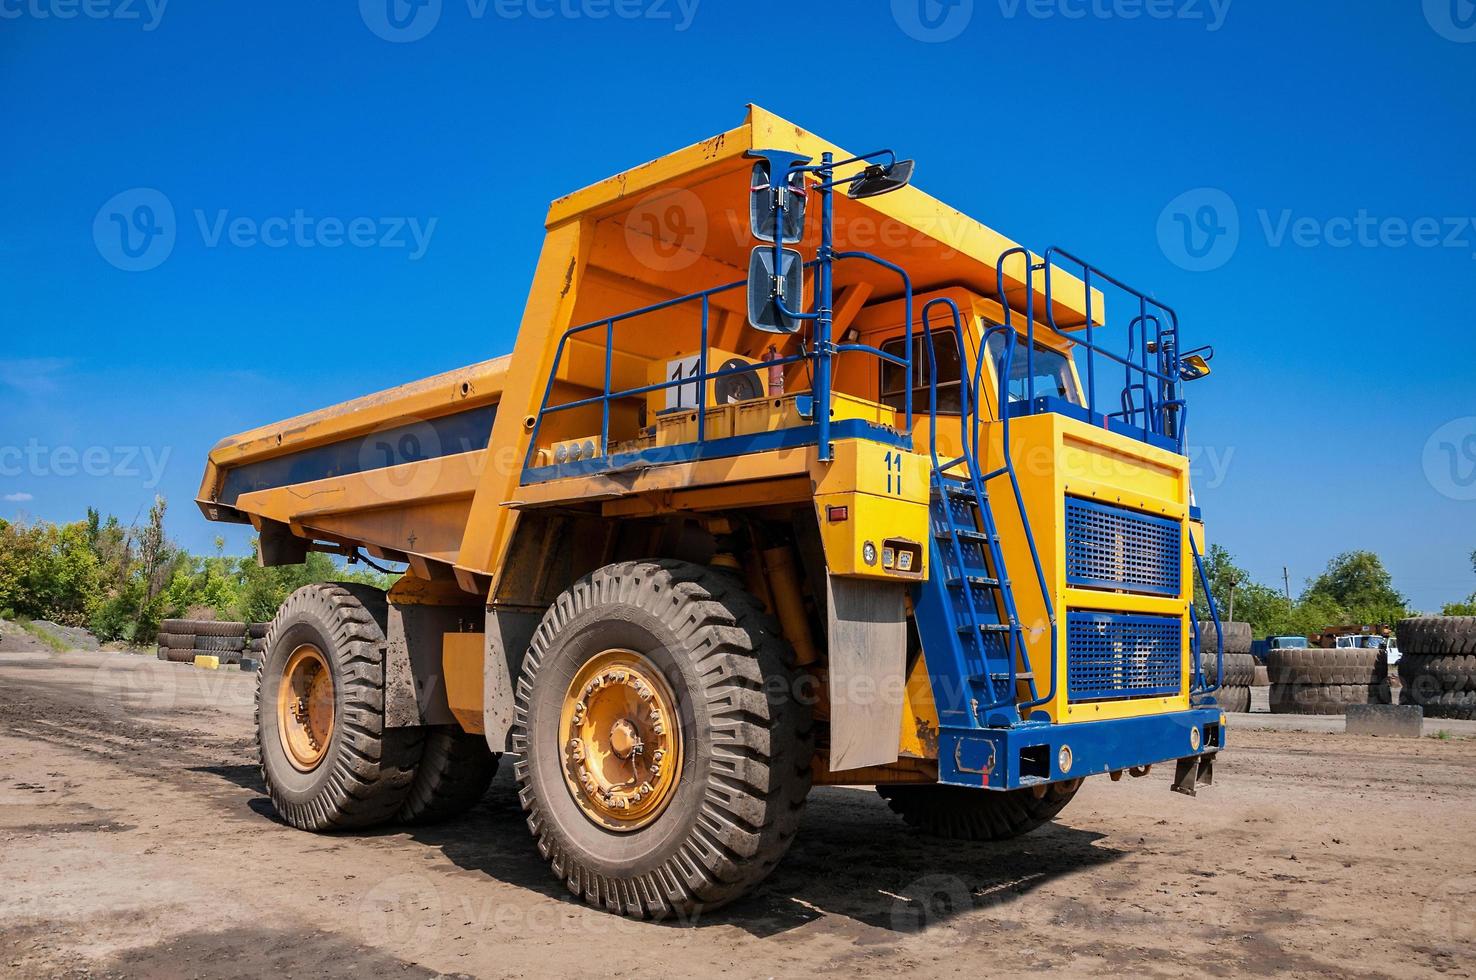 Quarry yellow dump truck drives alone industrial area at sunny day photo